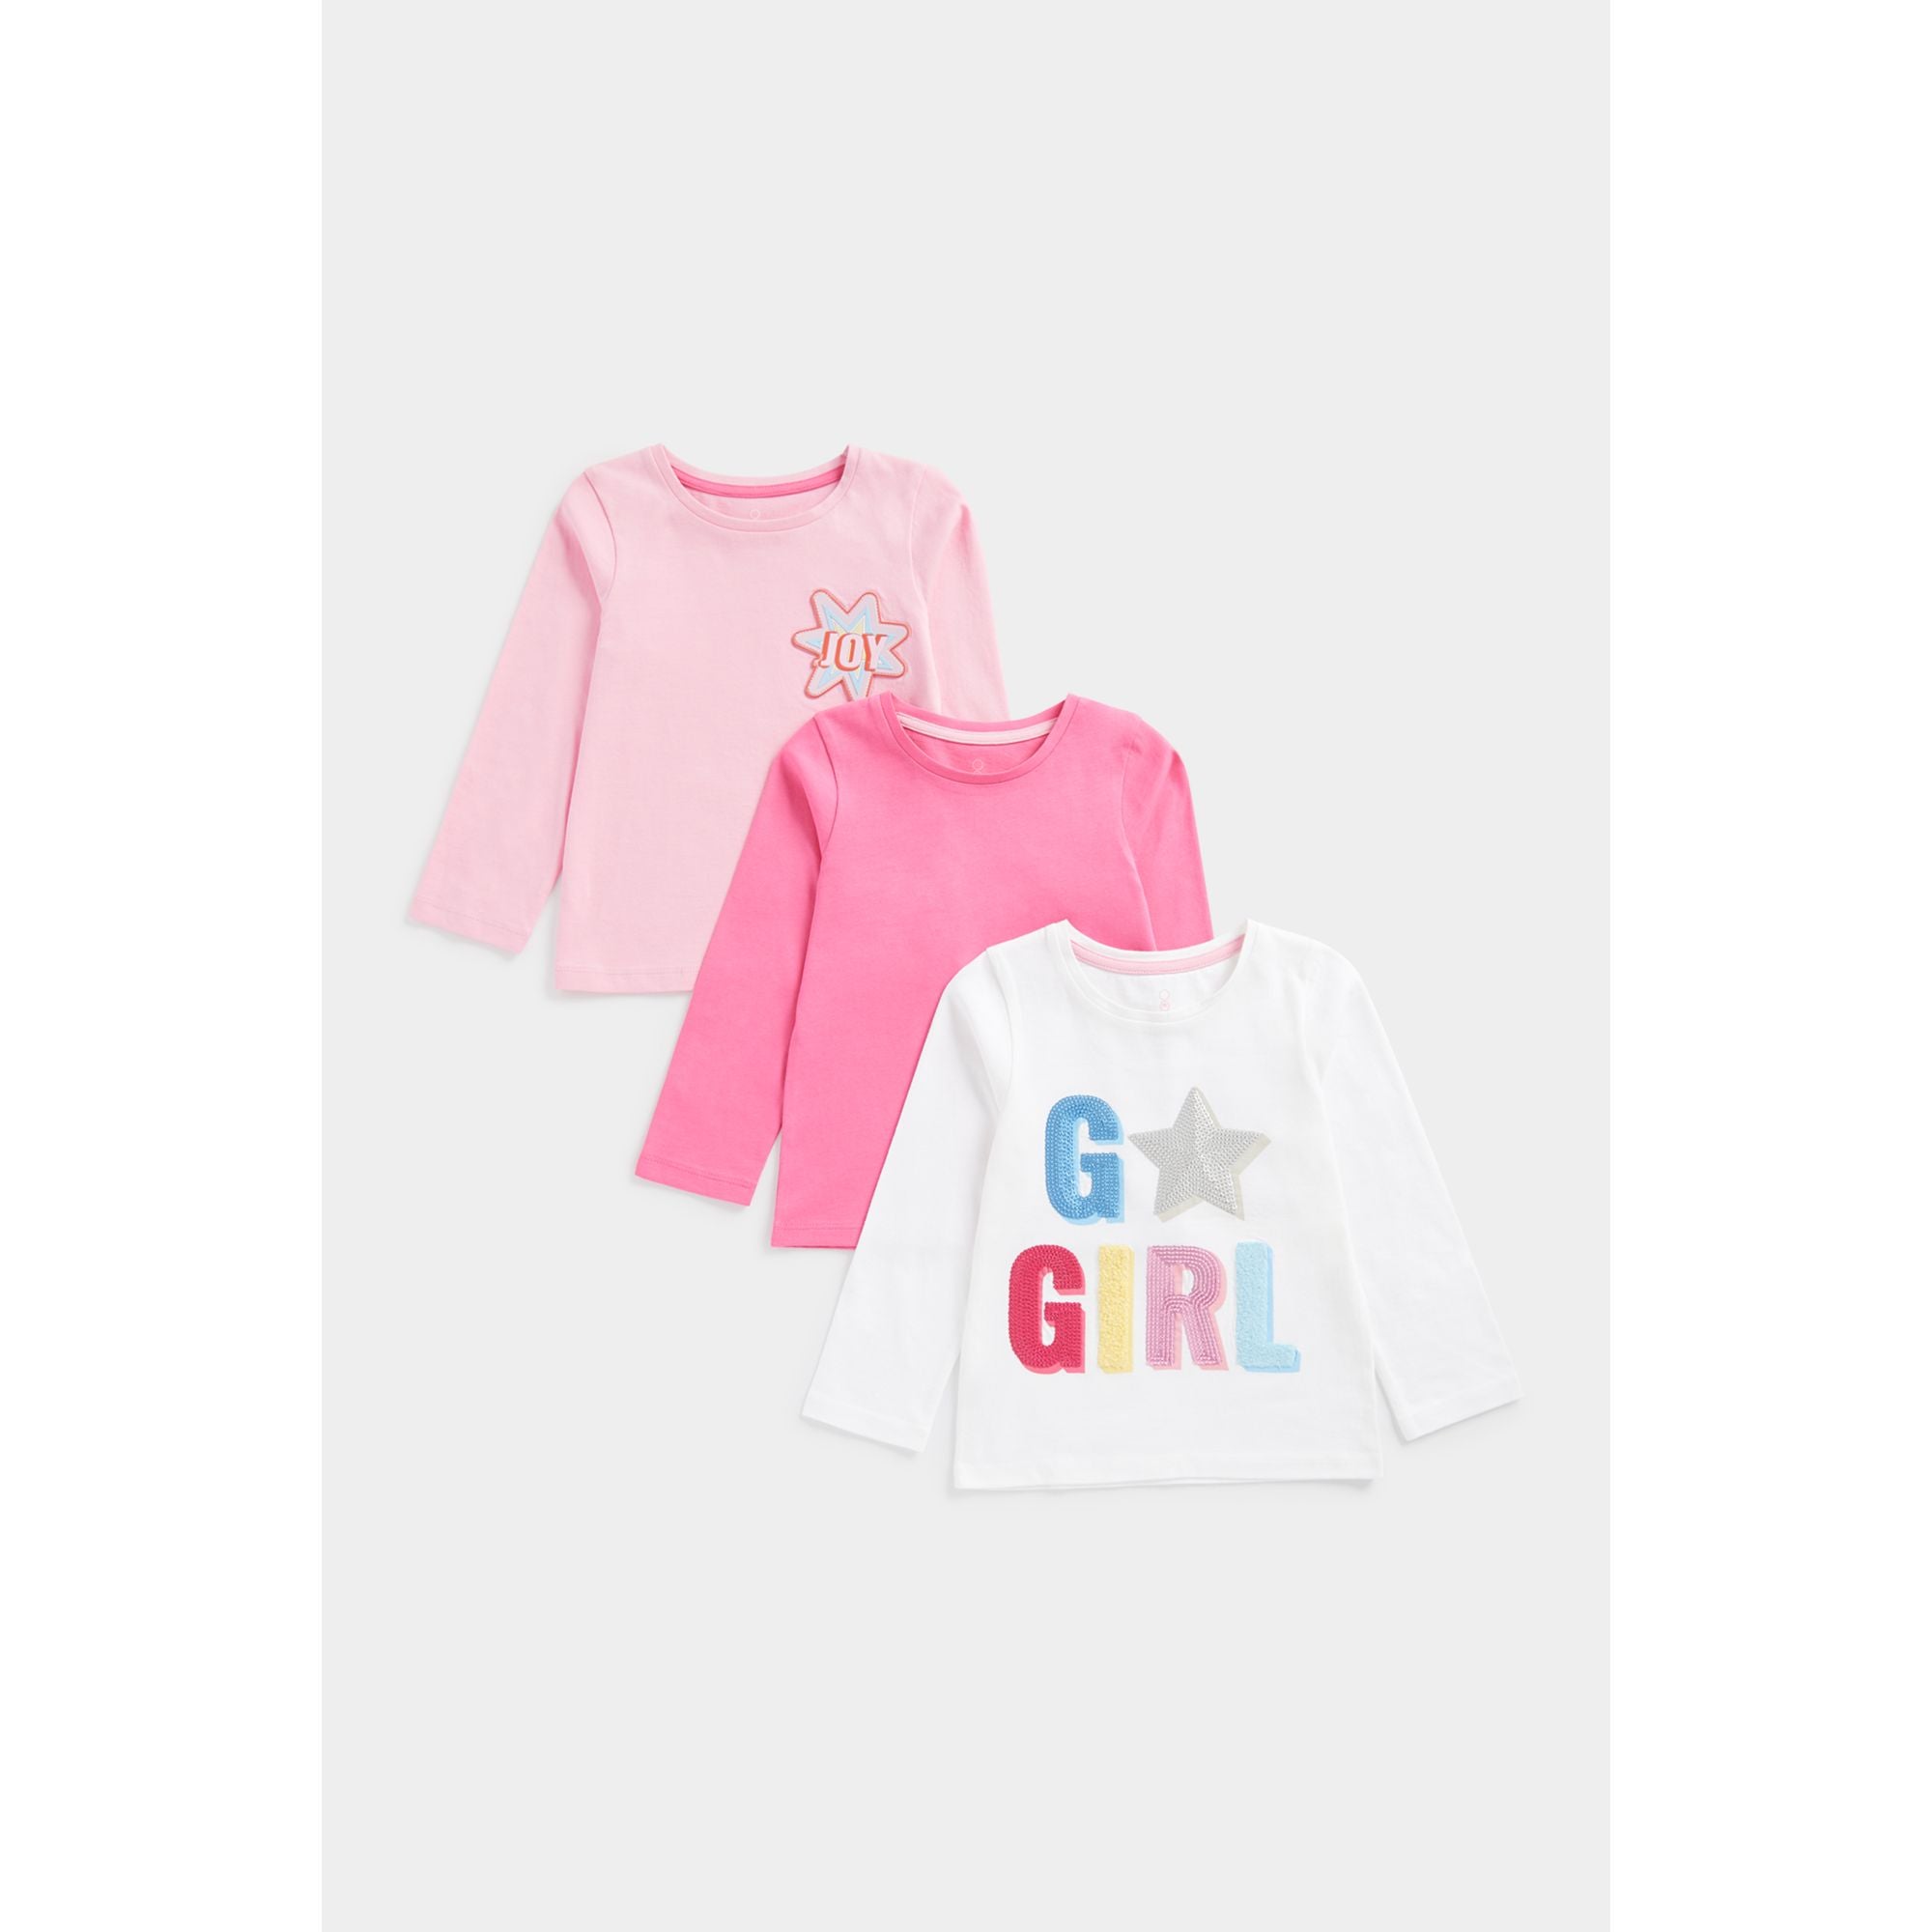 Mothercare Playful Long-Sleeved T-Shirts - 3 Pack